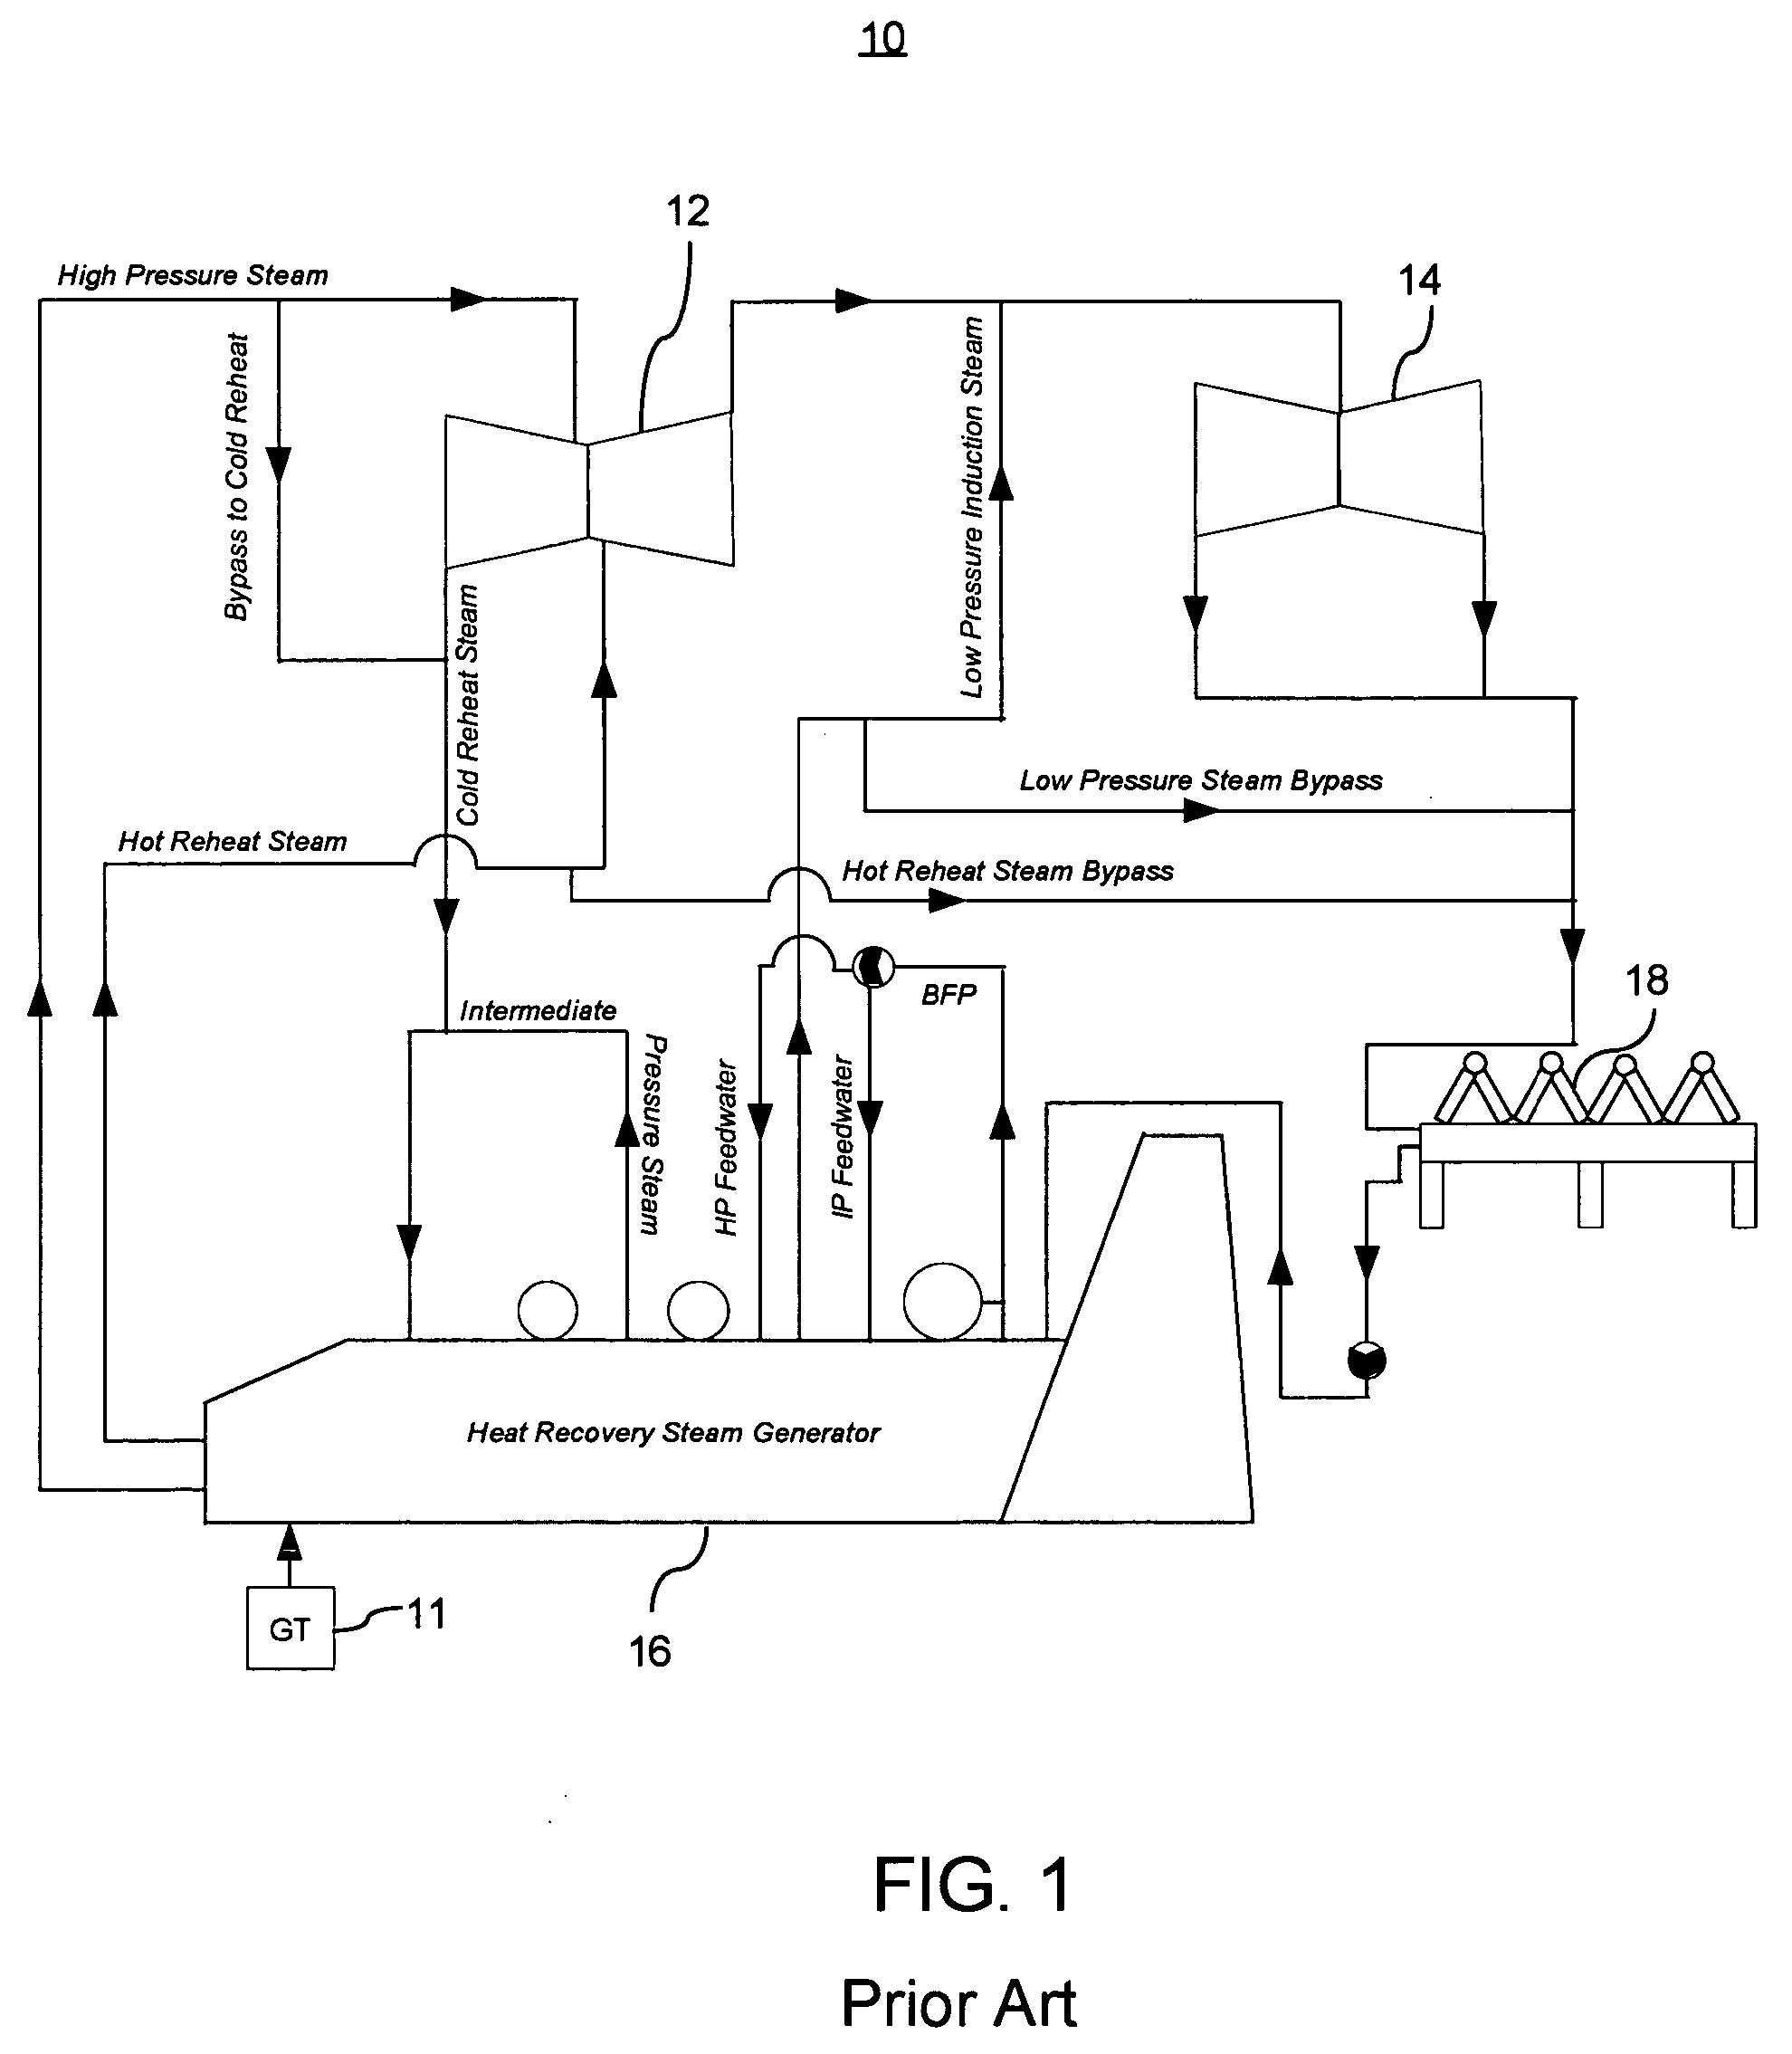 Combined cycle power plant with auxiliary air-cooled condenser